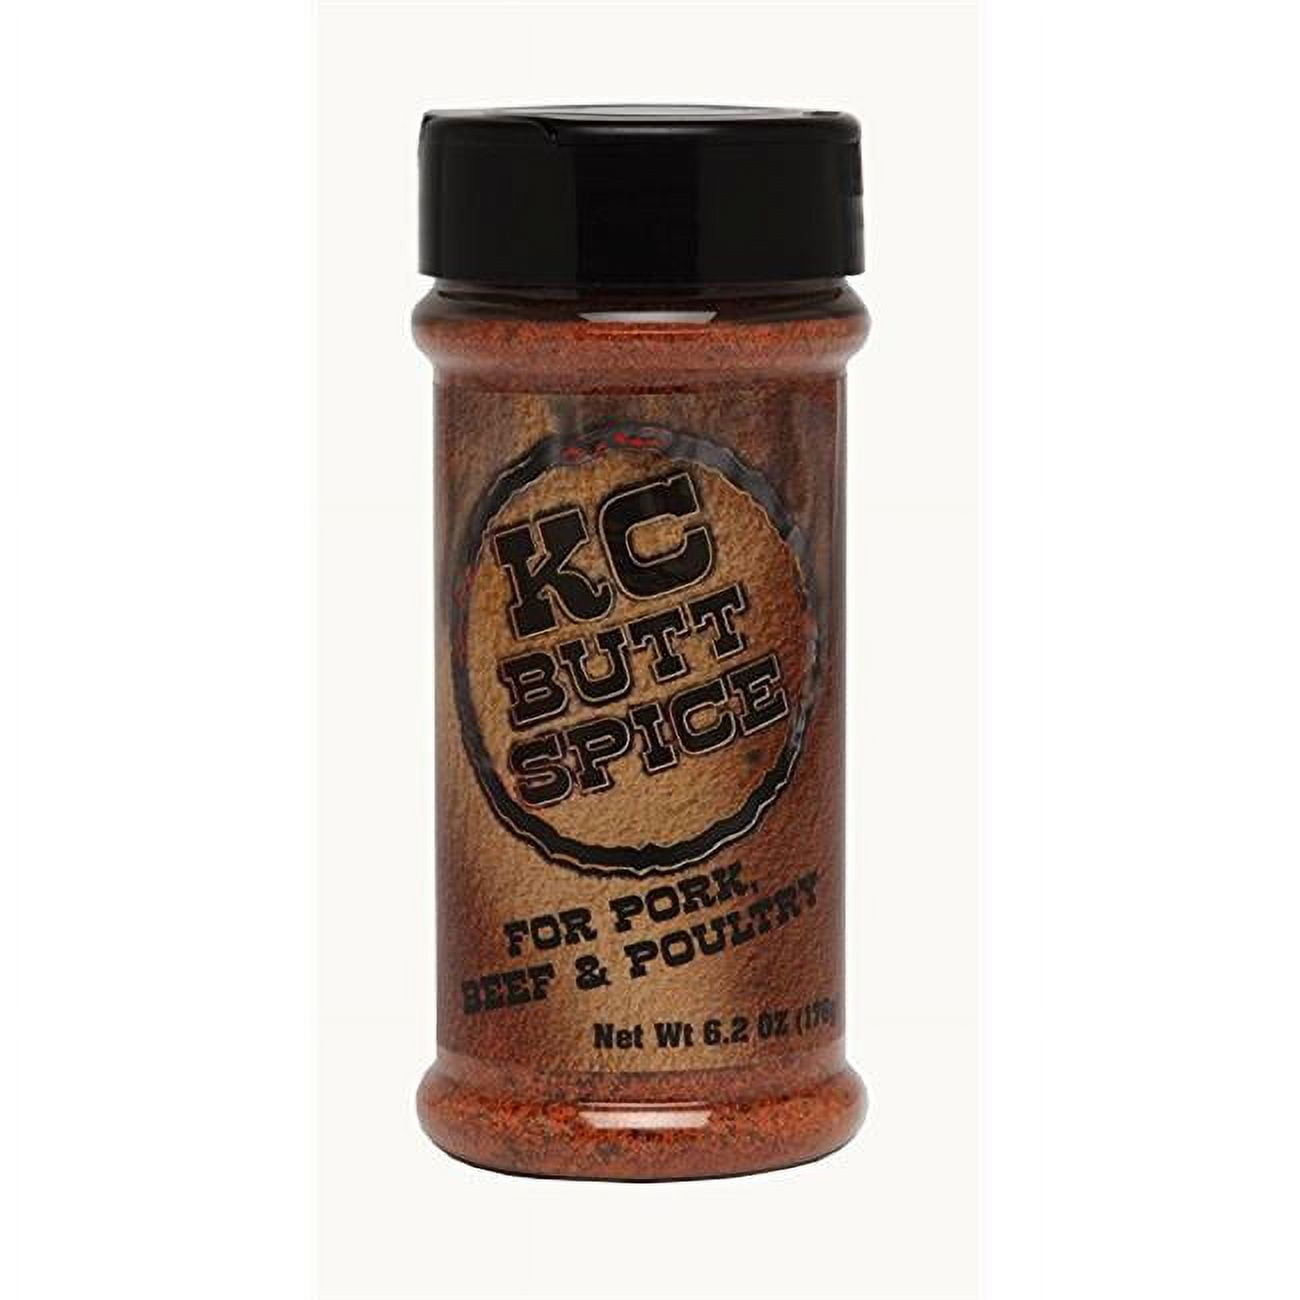 Picture of Old World Spices &amp; Seasonings 8393472 6.2 oz Kansas City Butt Spice Barbecue